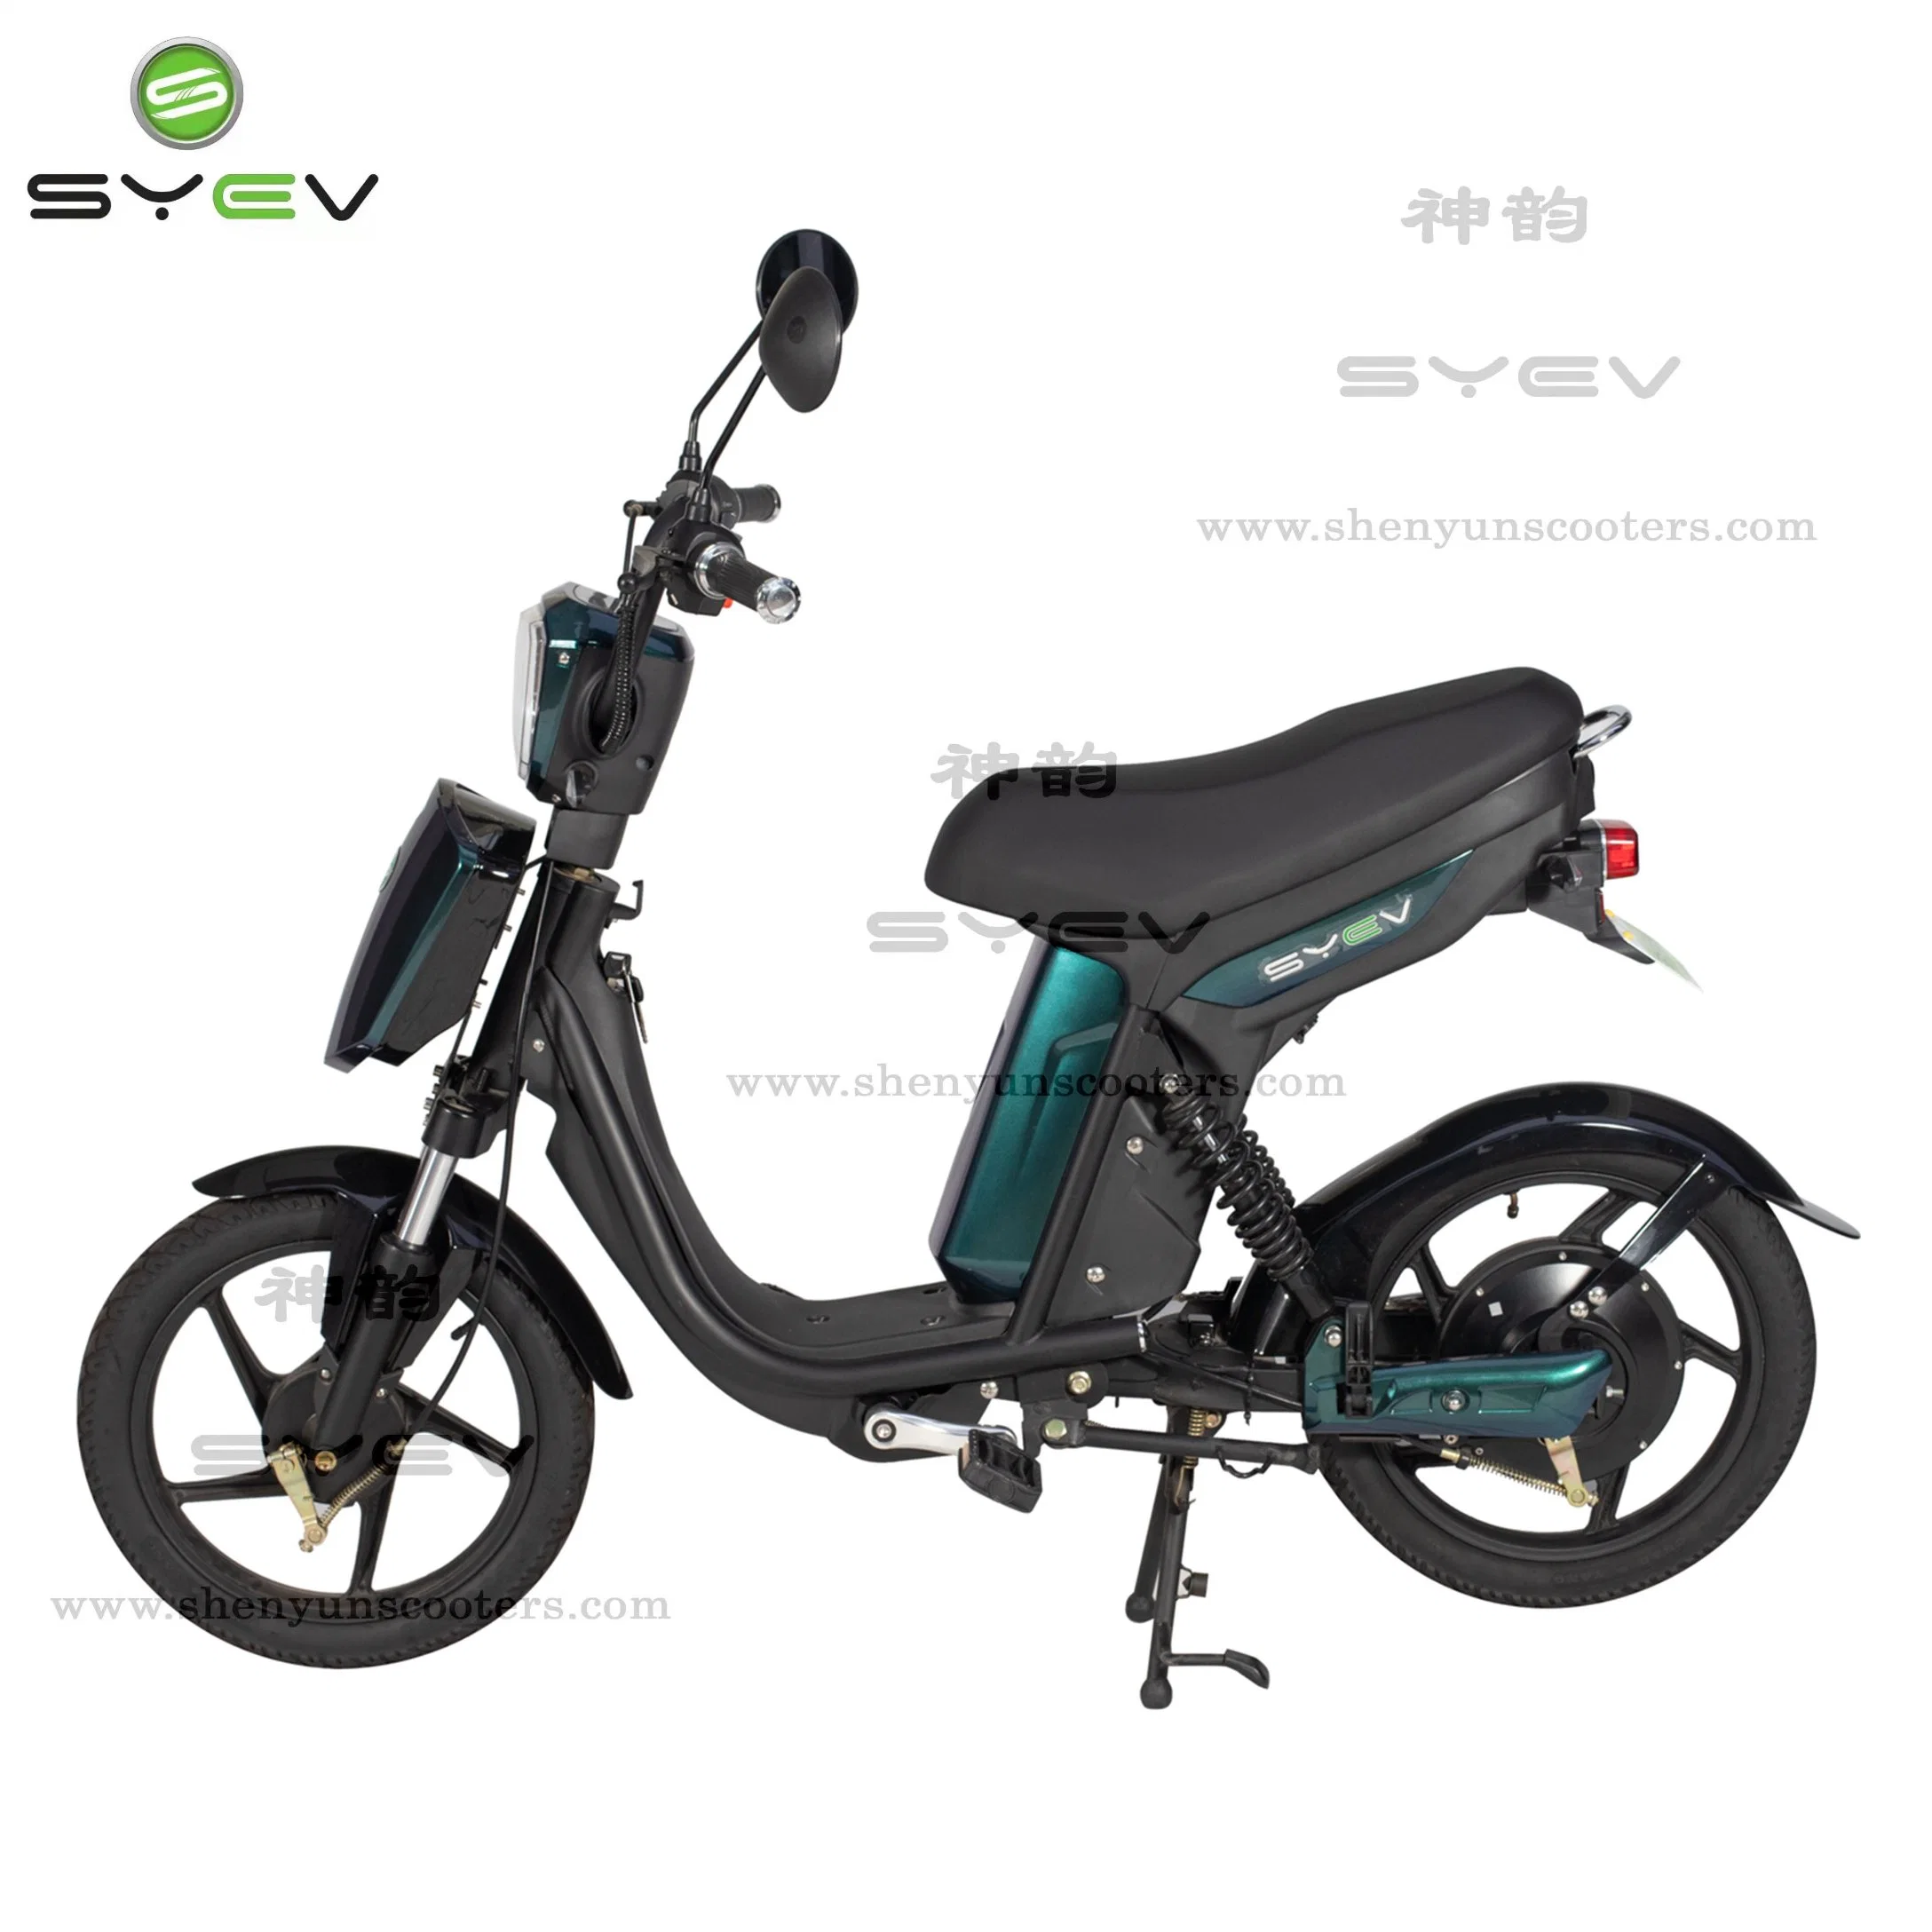 EU Standard CE Certificate Syev Factory Wholesale/Supplier Sy-Lxqs Basic Cheap Price Worldwide Stylish 2 Two Wheel Motorbike Electric Bike with 25~32km/H Safe Speed